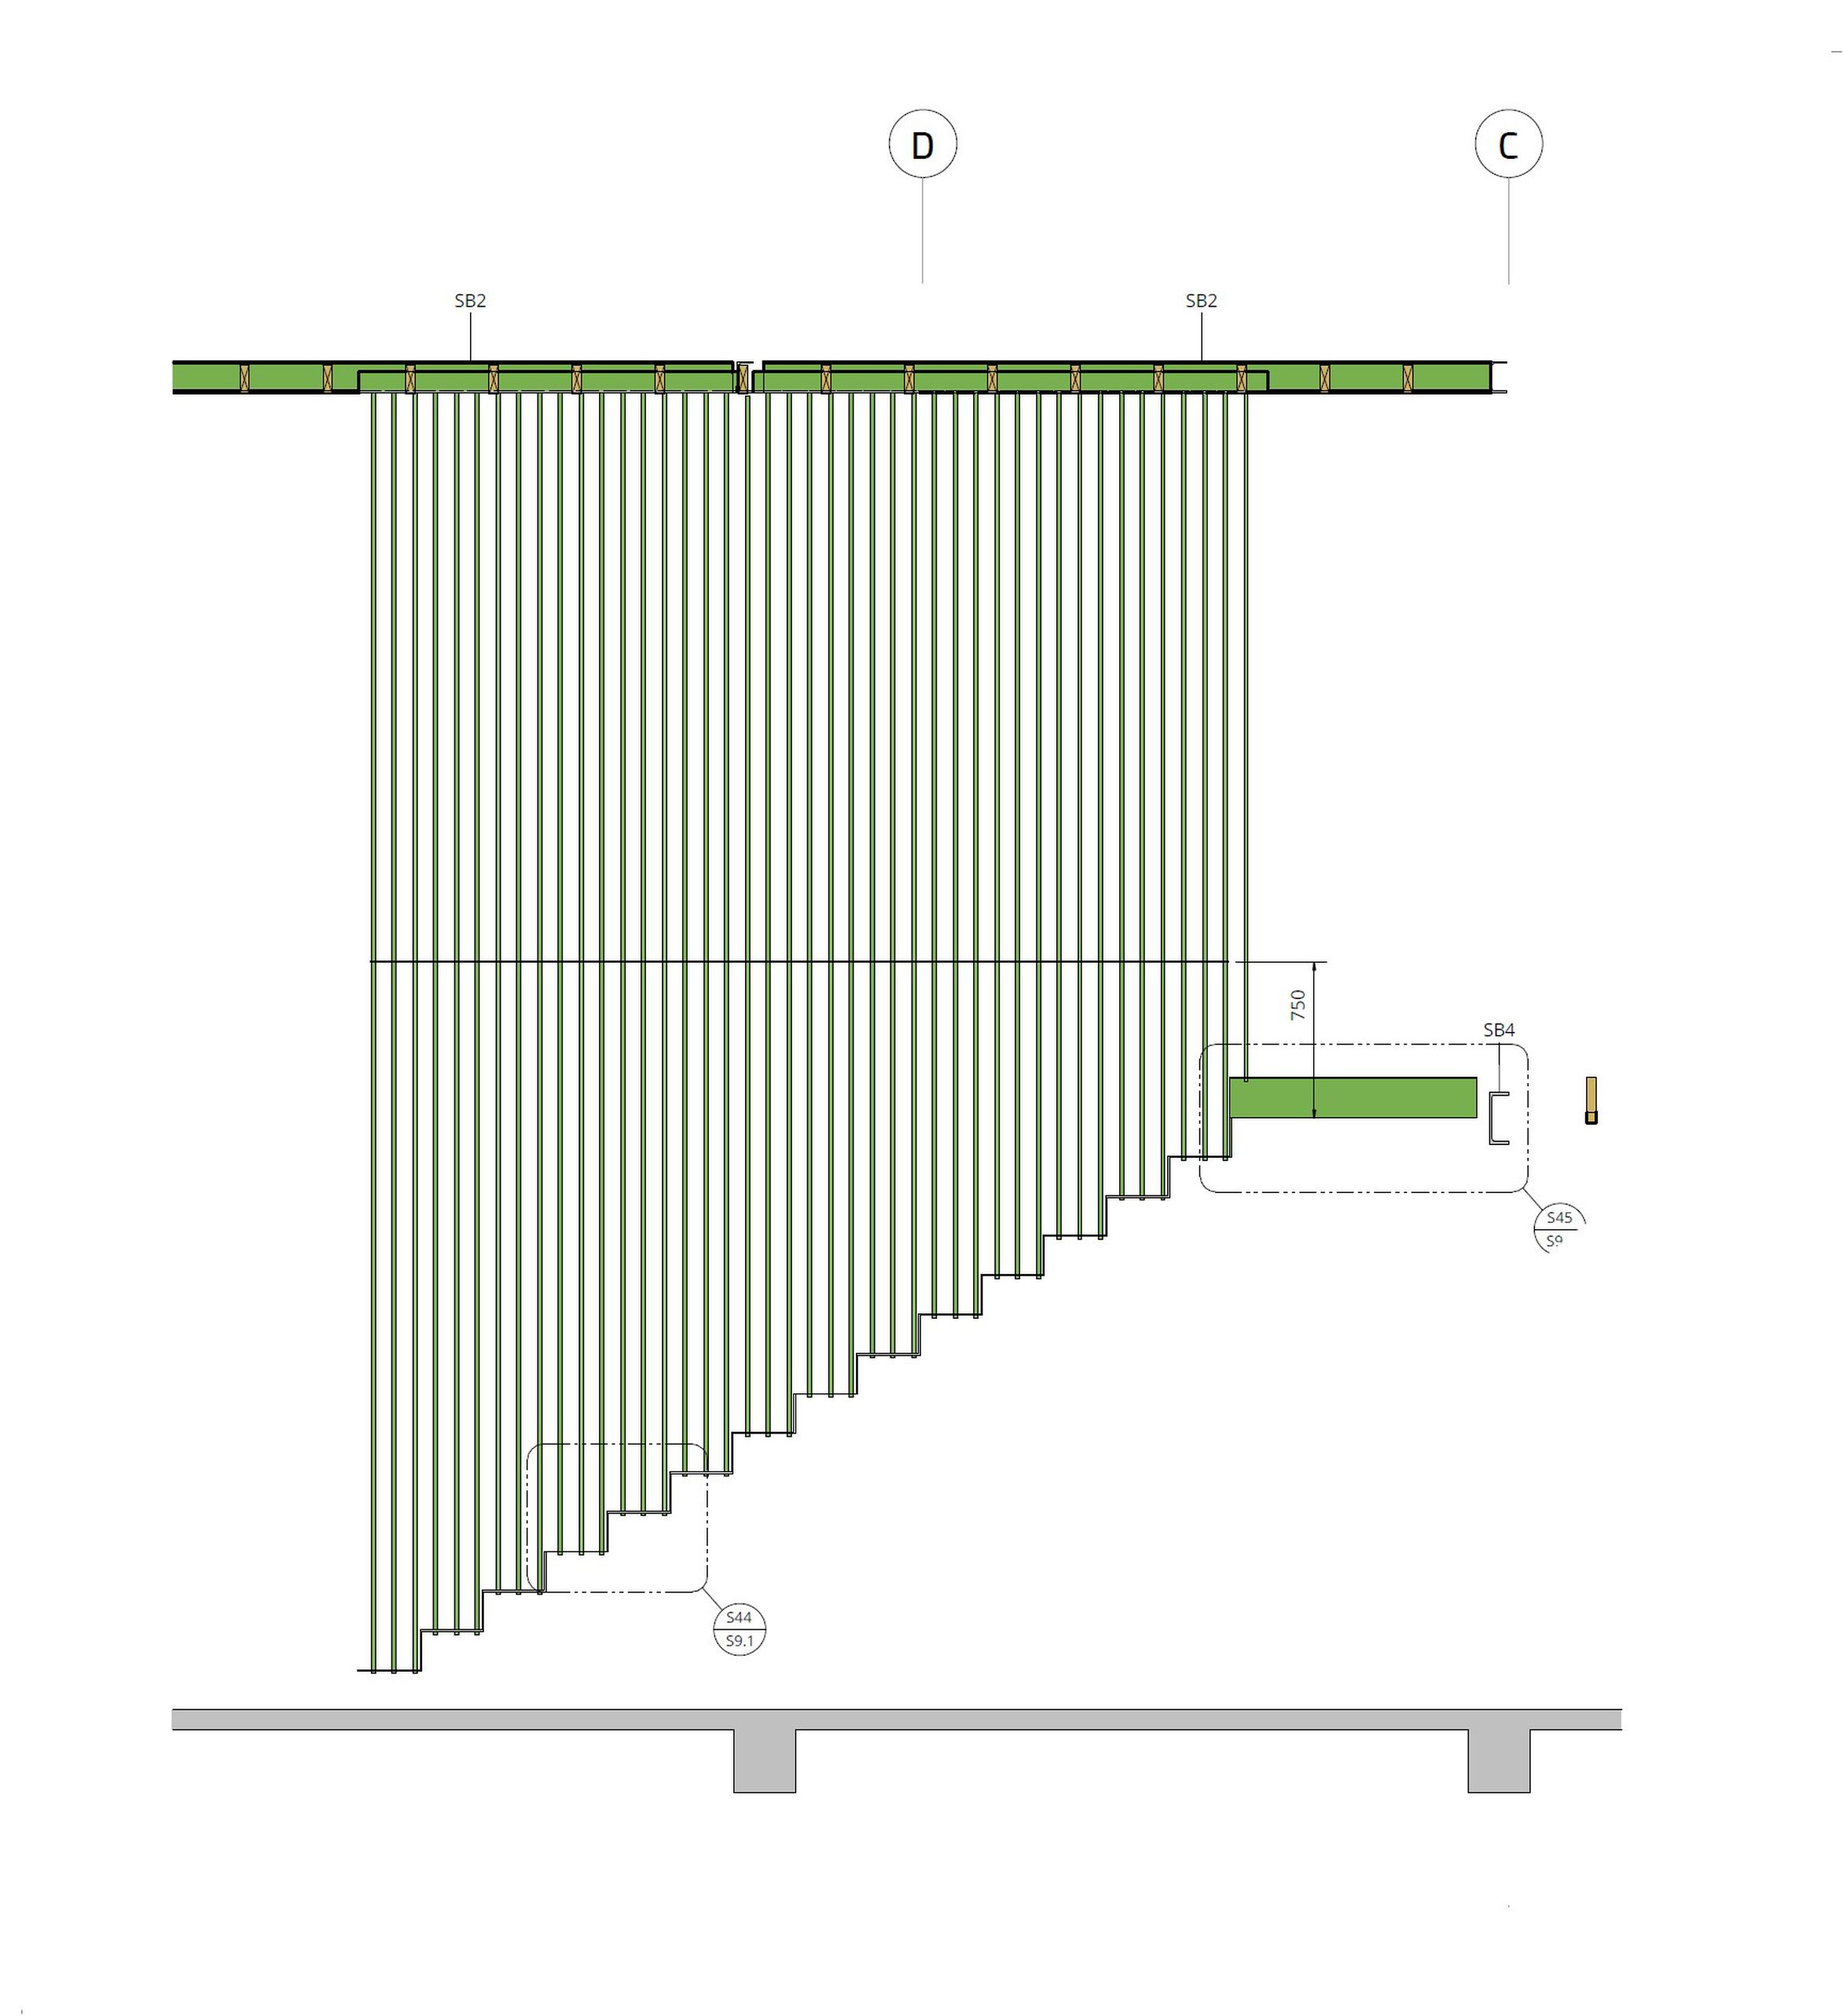 Revit Drawing - Stairs